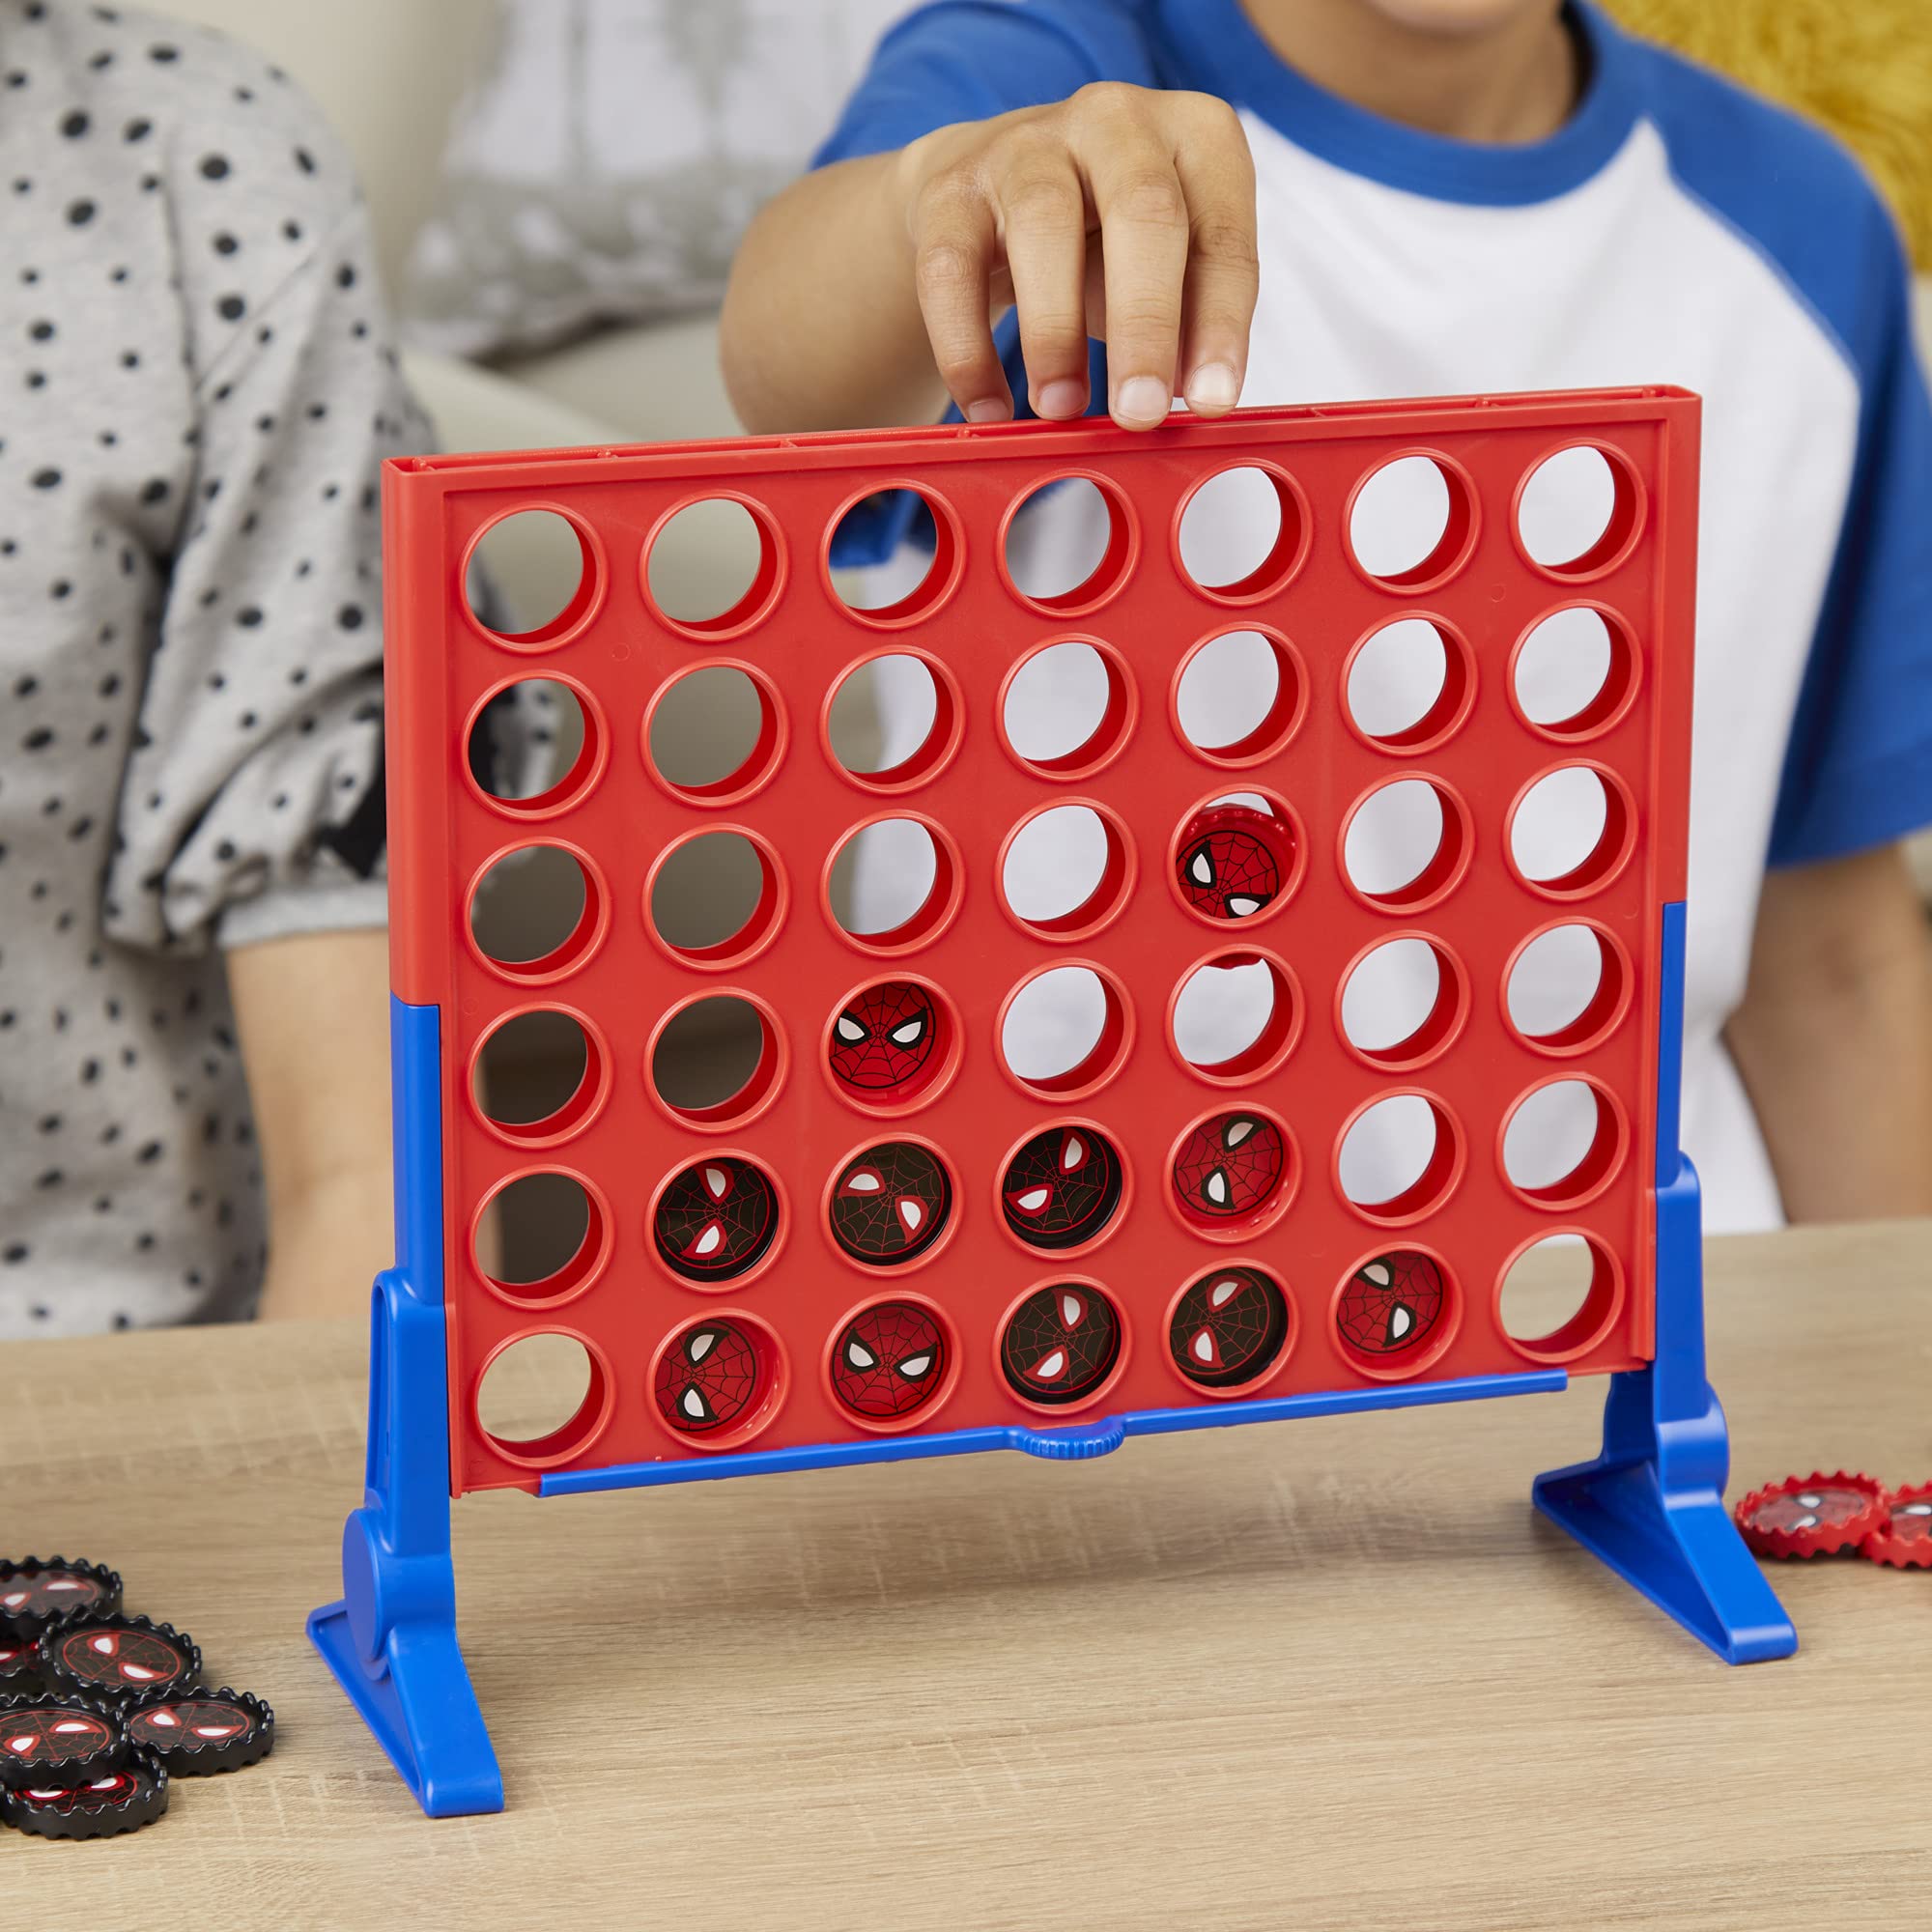 Hasbro Gaming Connect 4: Marvel Spider-Man Edition, Strategy Game for 2 Players, Ages 6 and Up (Amazon Exclusive)